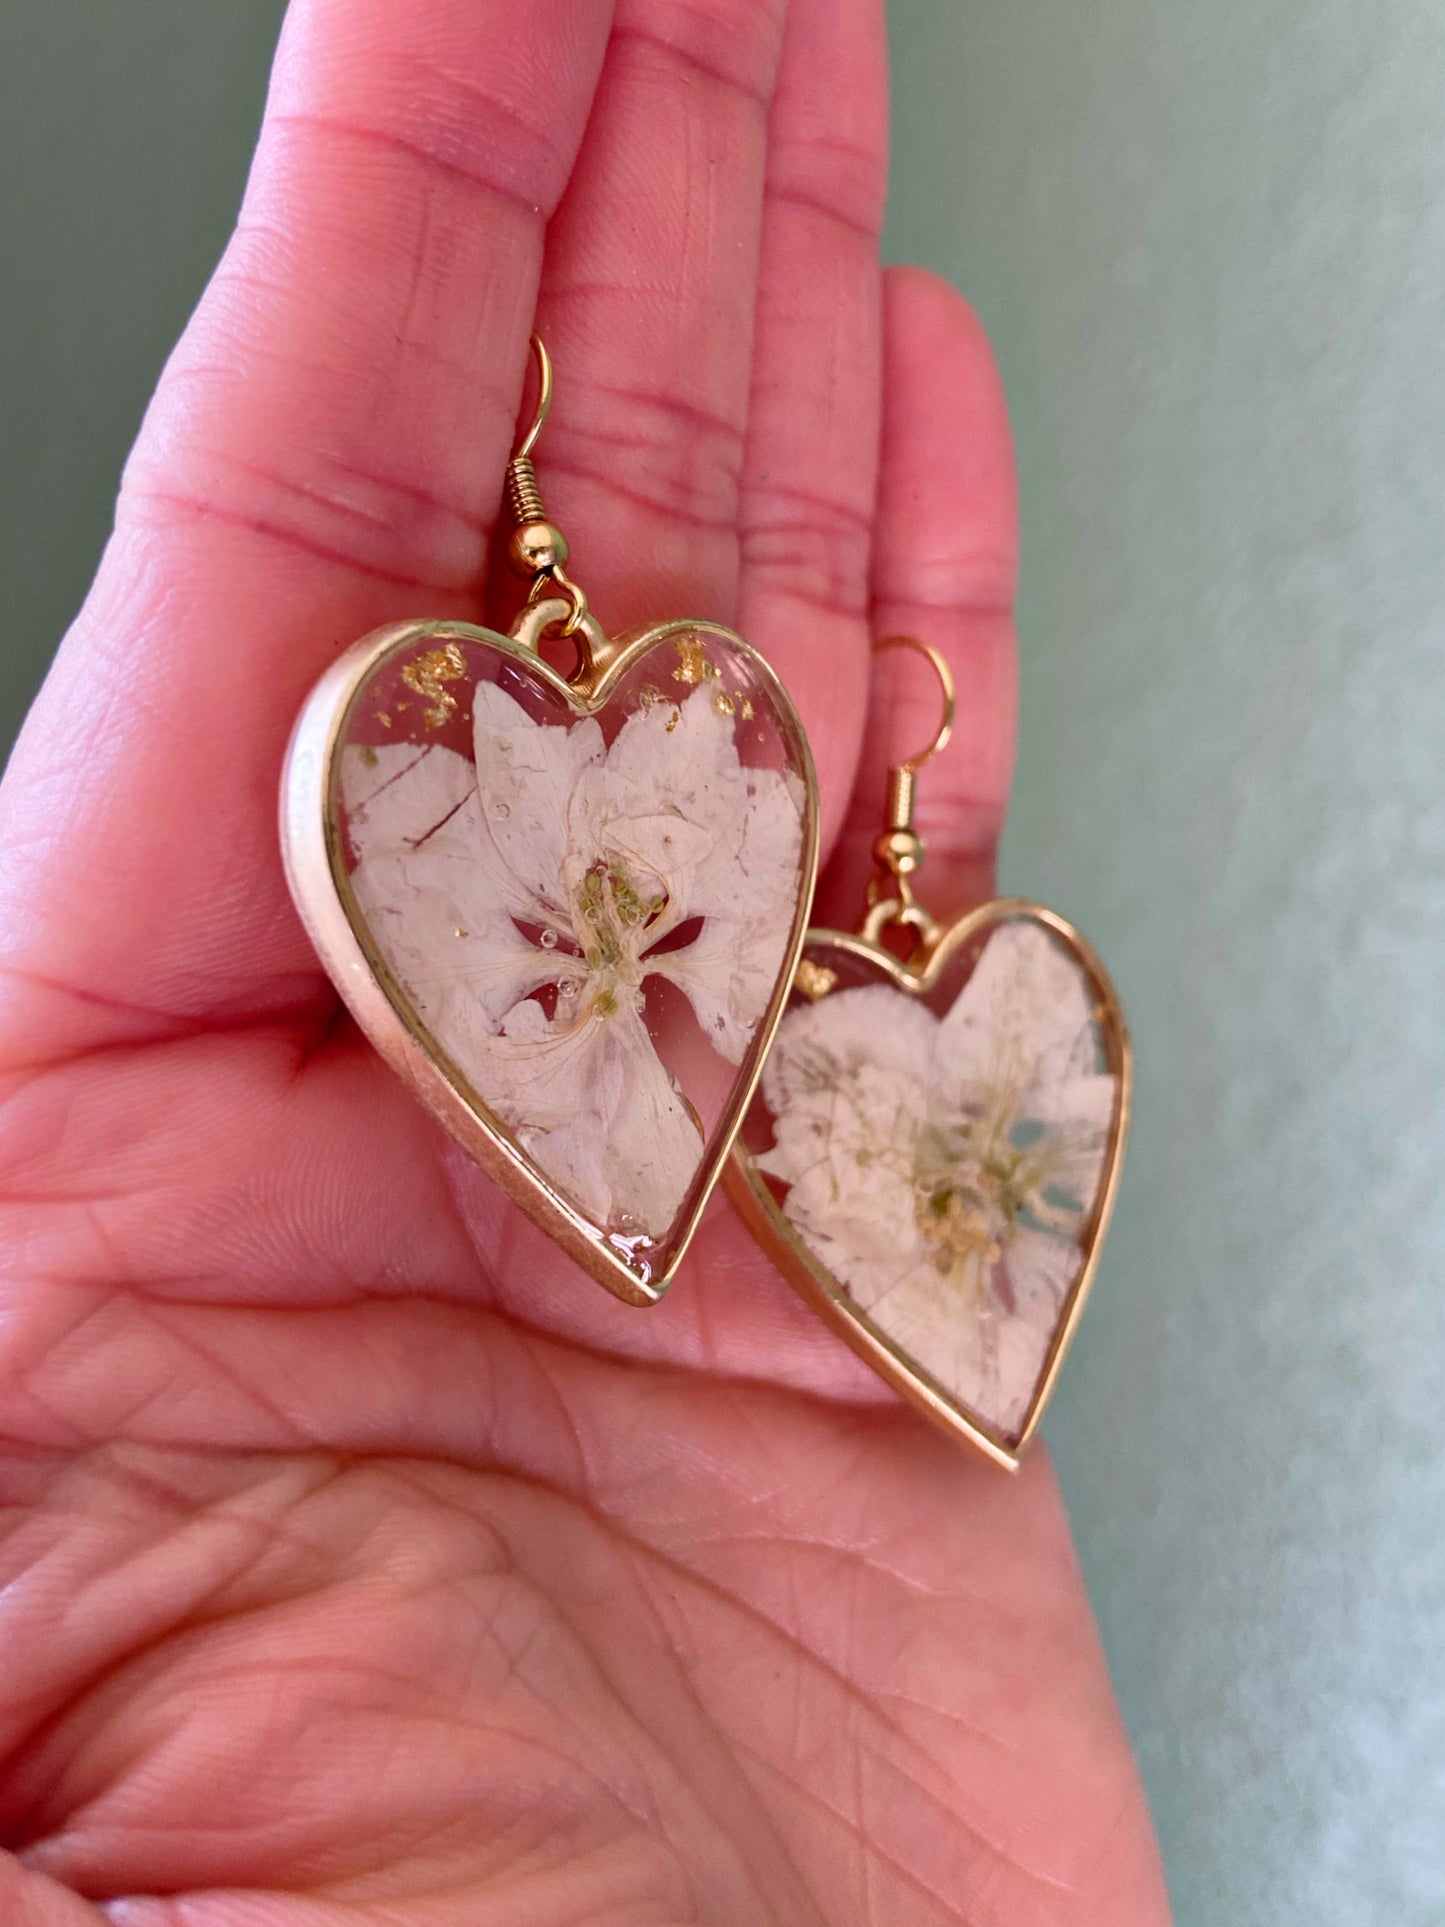 Larkspur- White pressed flowers and gold flake inside open gold heart earrings, preserved botanical jewelry